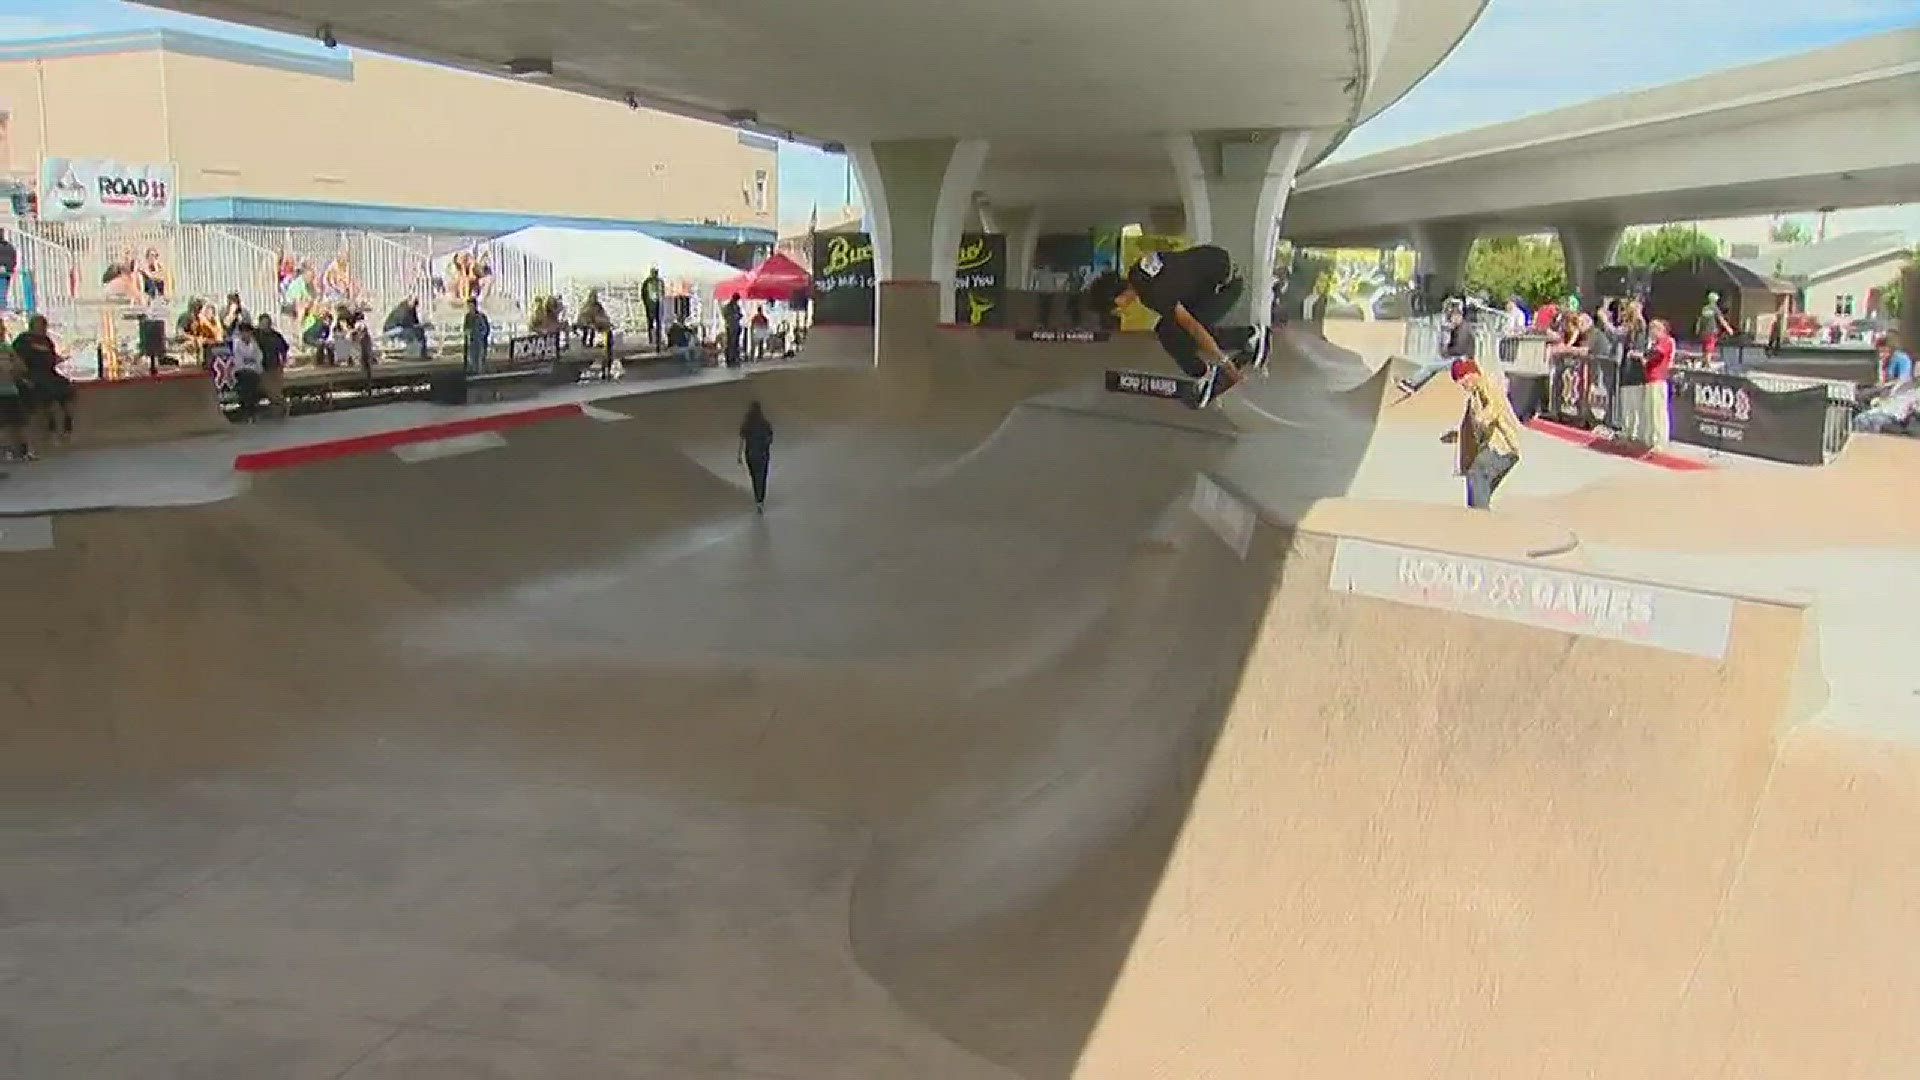 Hundreds come to Rhoades Skate Park in Boise for the 2017 X Games qualifier